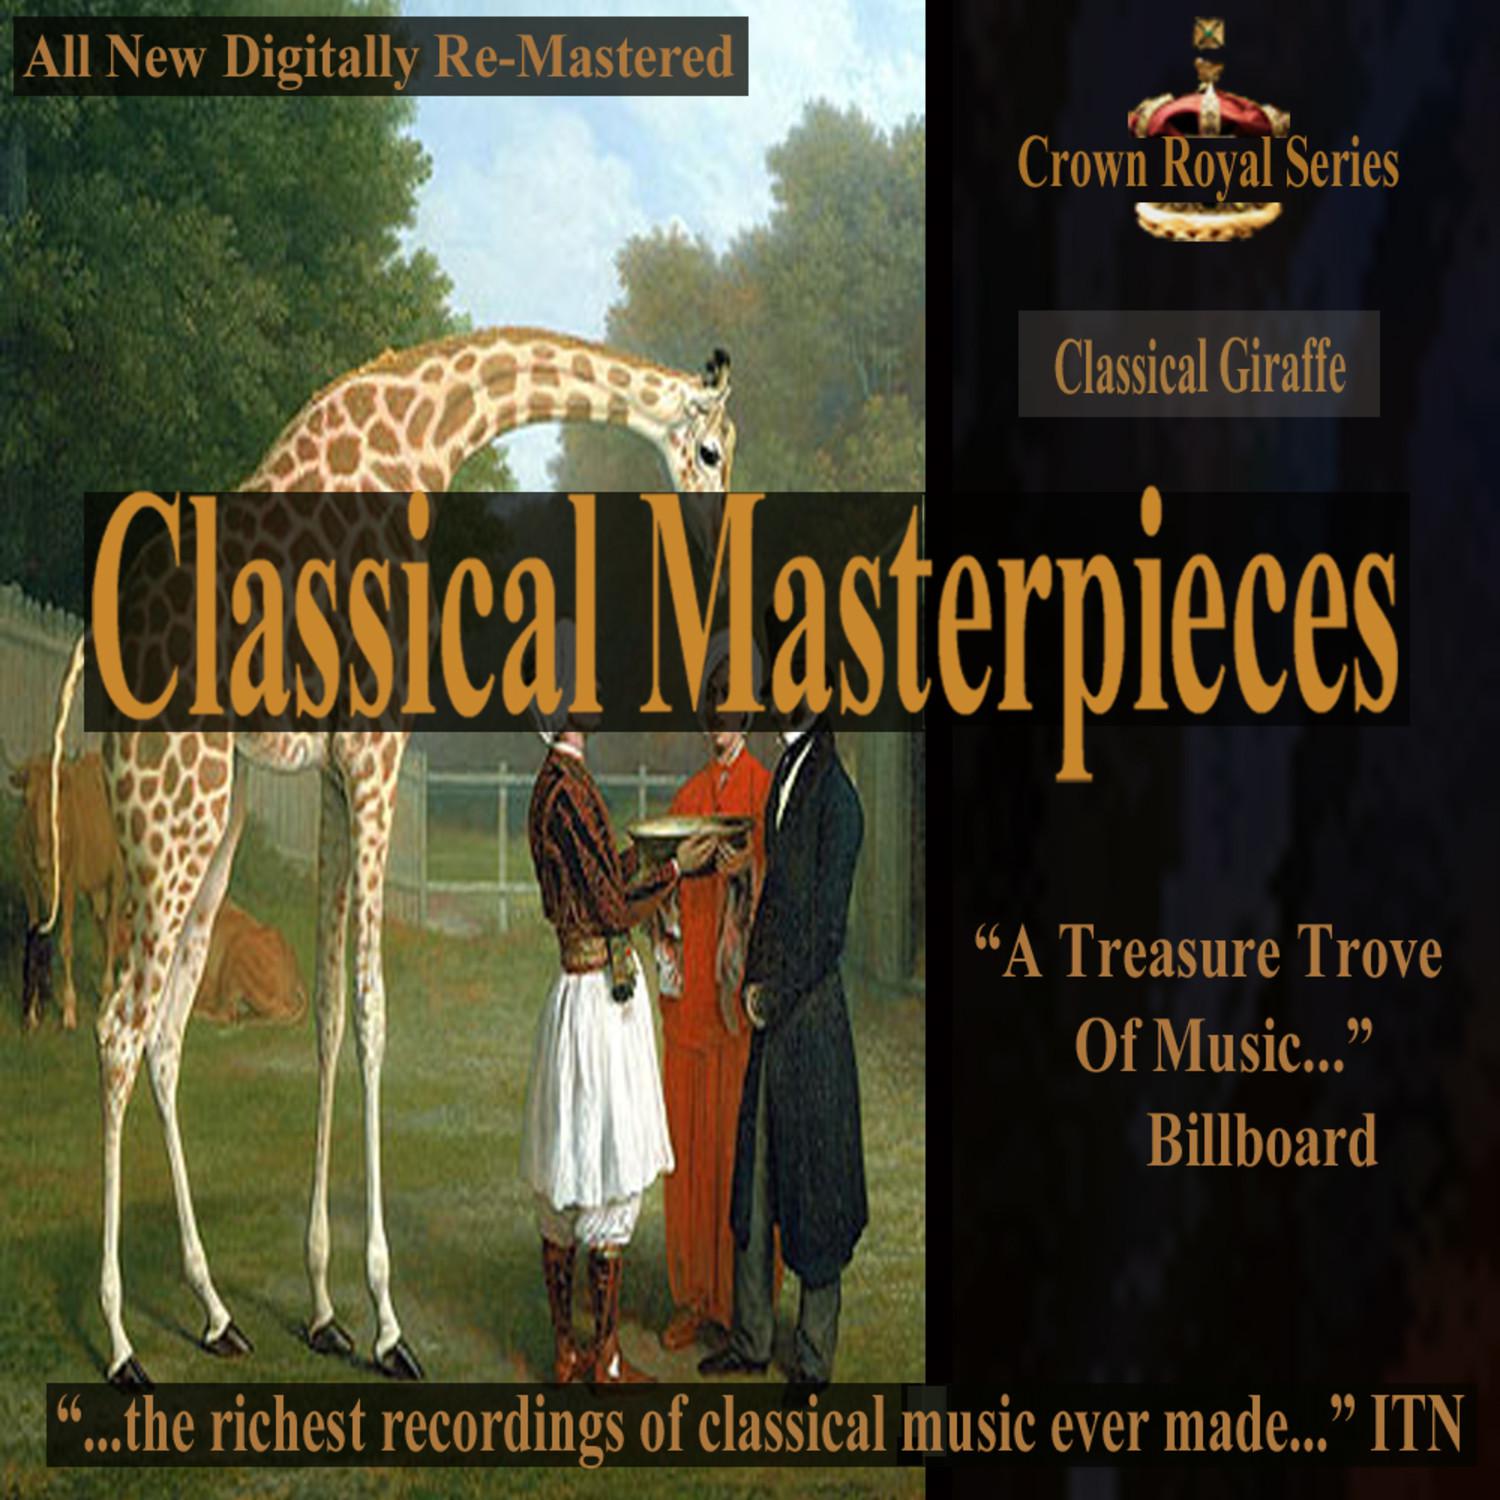 Concerto No.3 for Piano and Orchestra in C Minor, Op.37, II Largo, Part 1